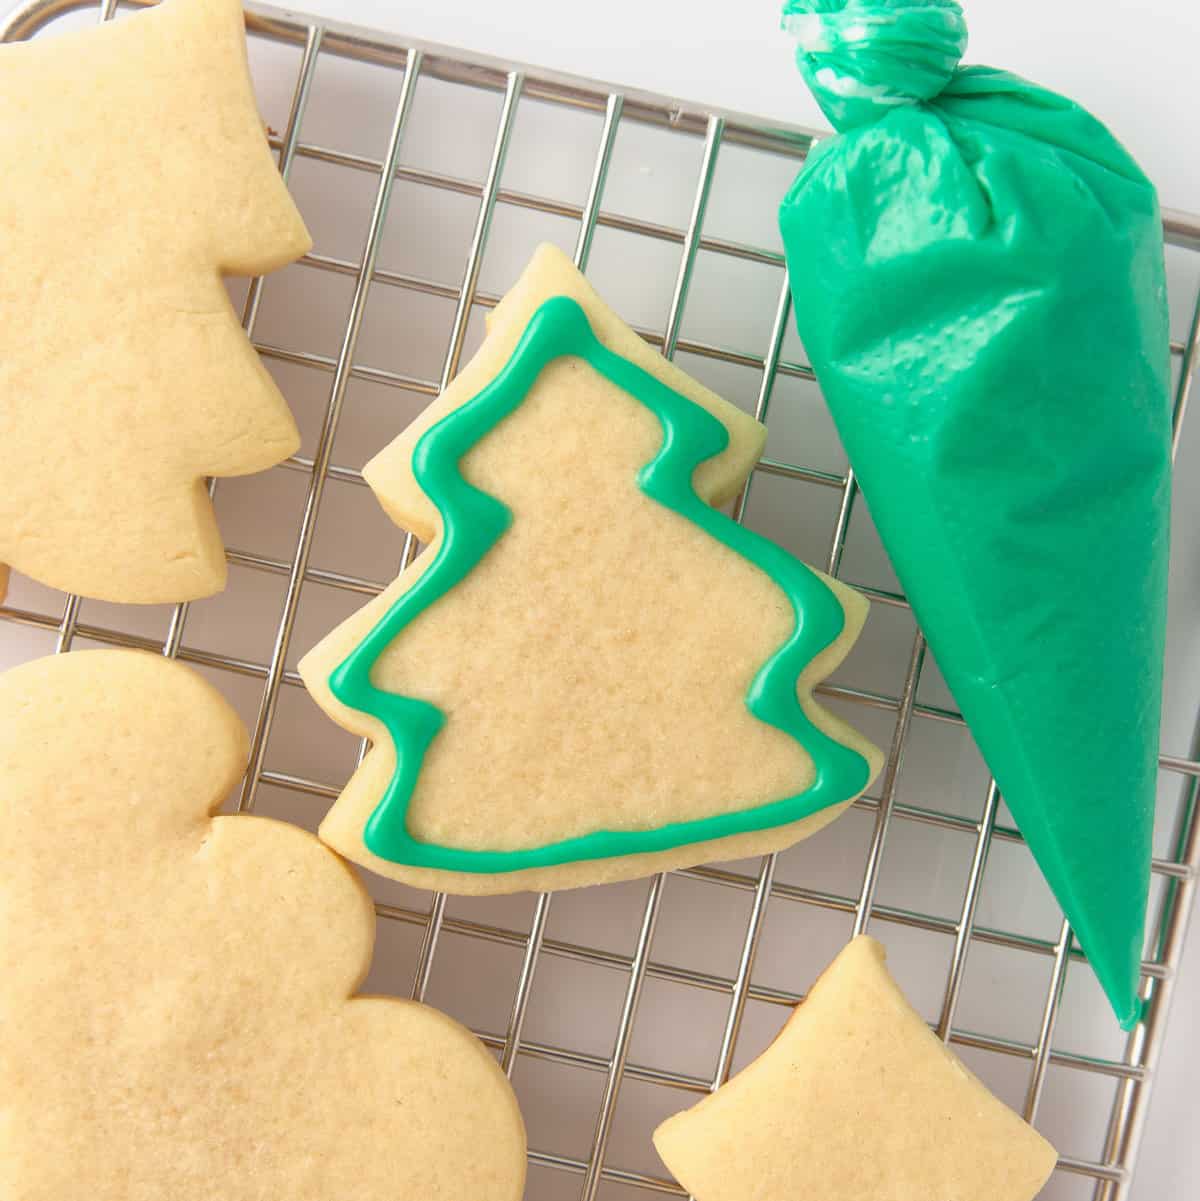 Basic Cookie Decorating Supplies and a Printable Shopping List